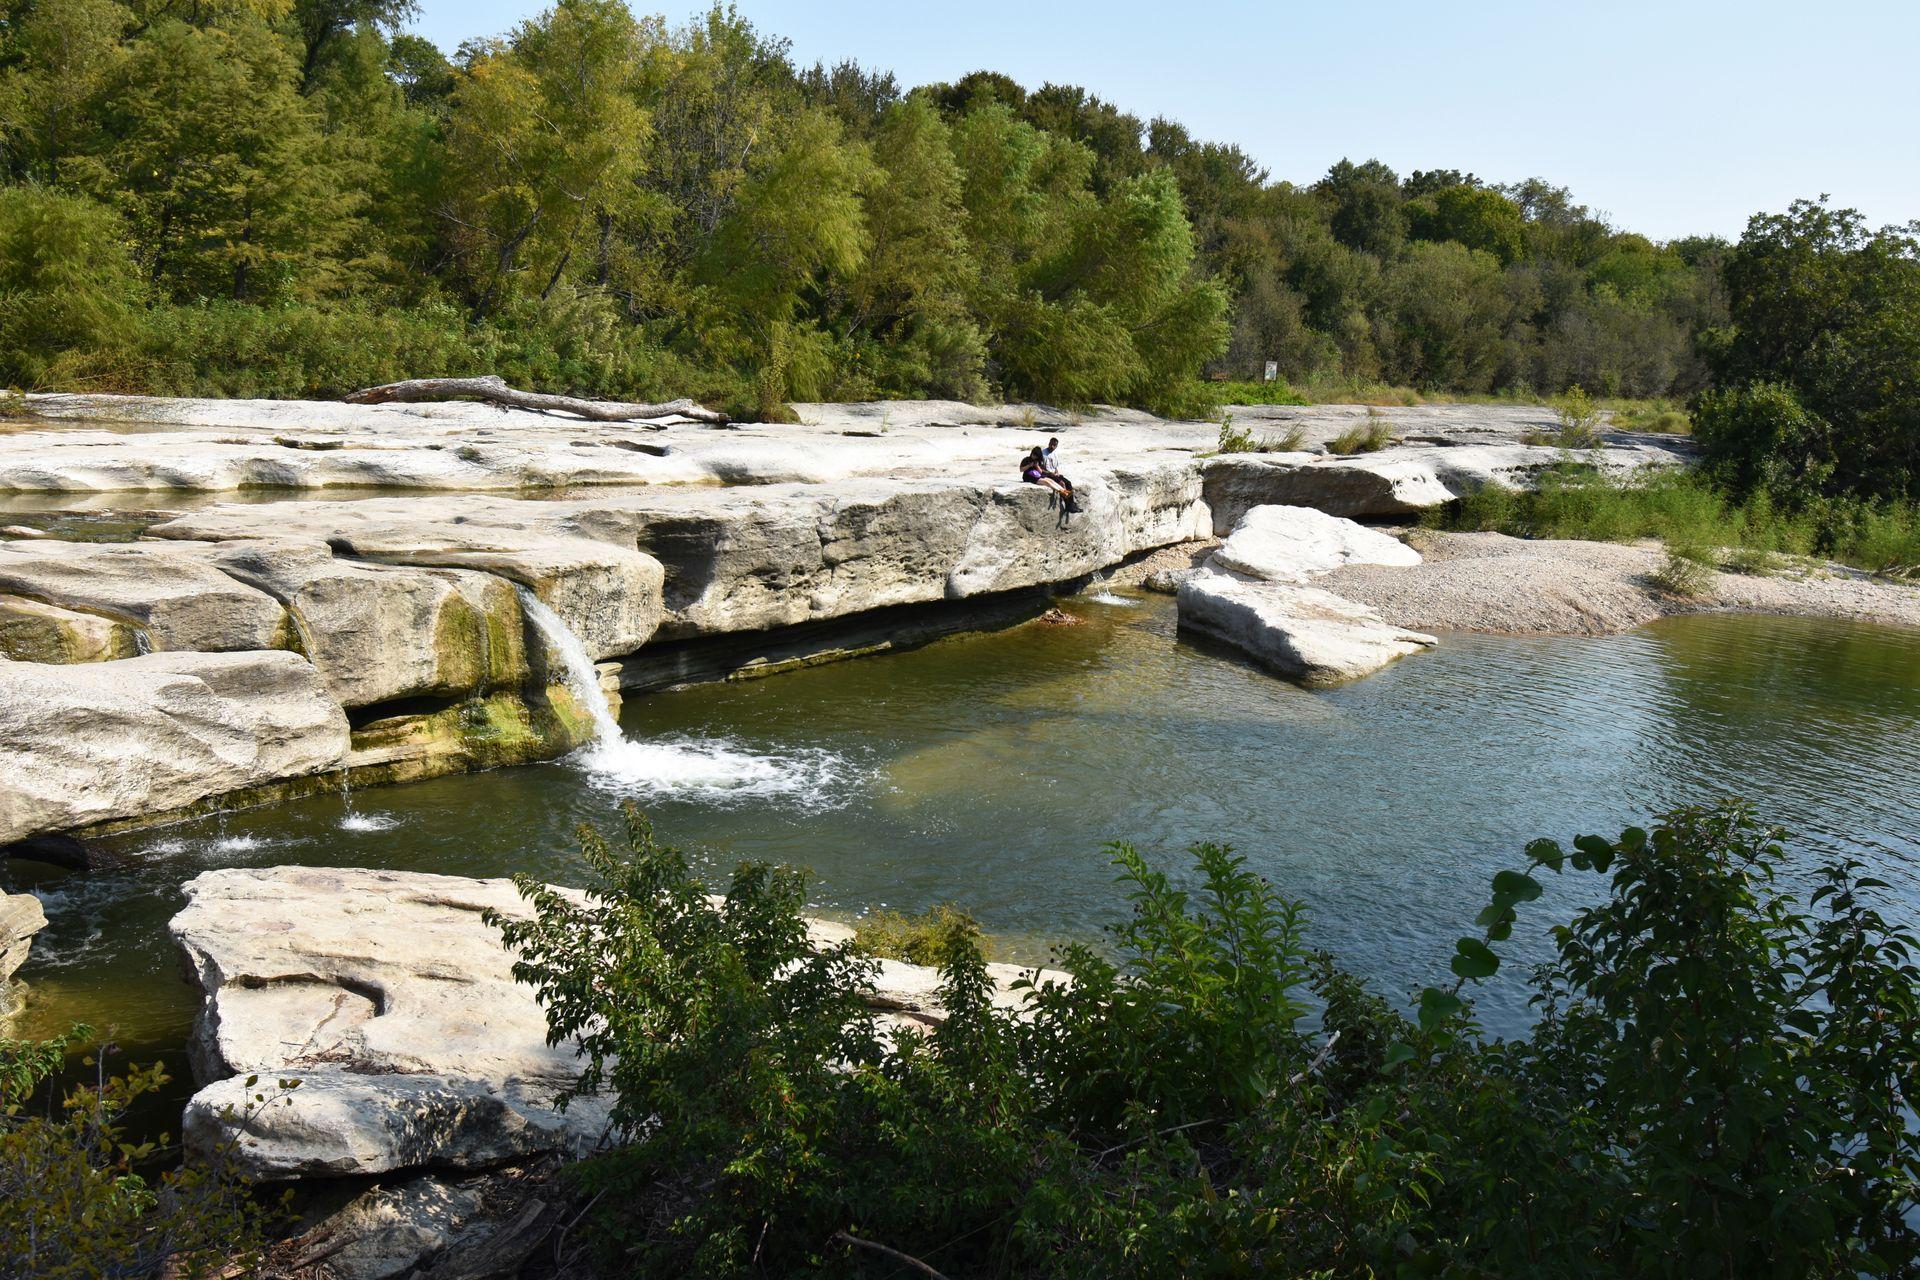 A rock wall with a waterfall at McKinney Falls State Park. The waterfall flows into a swimming area and two people sit on the rocks.